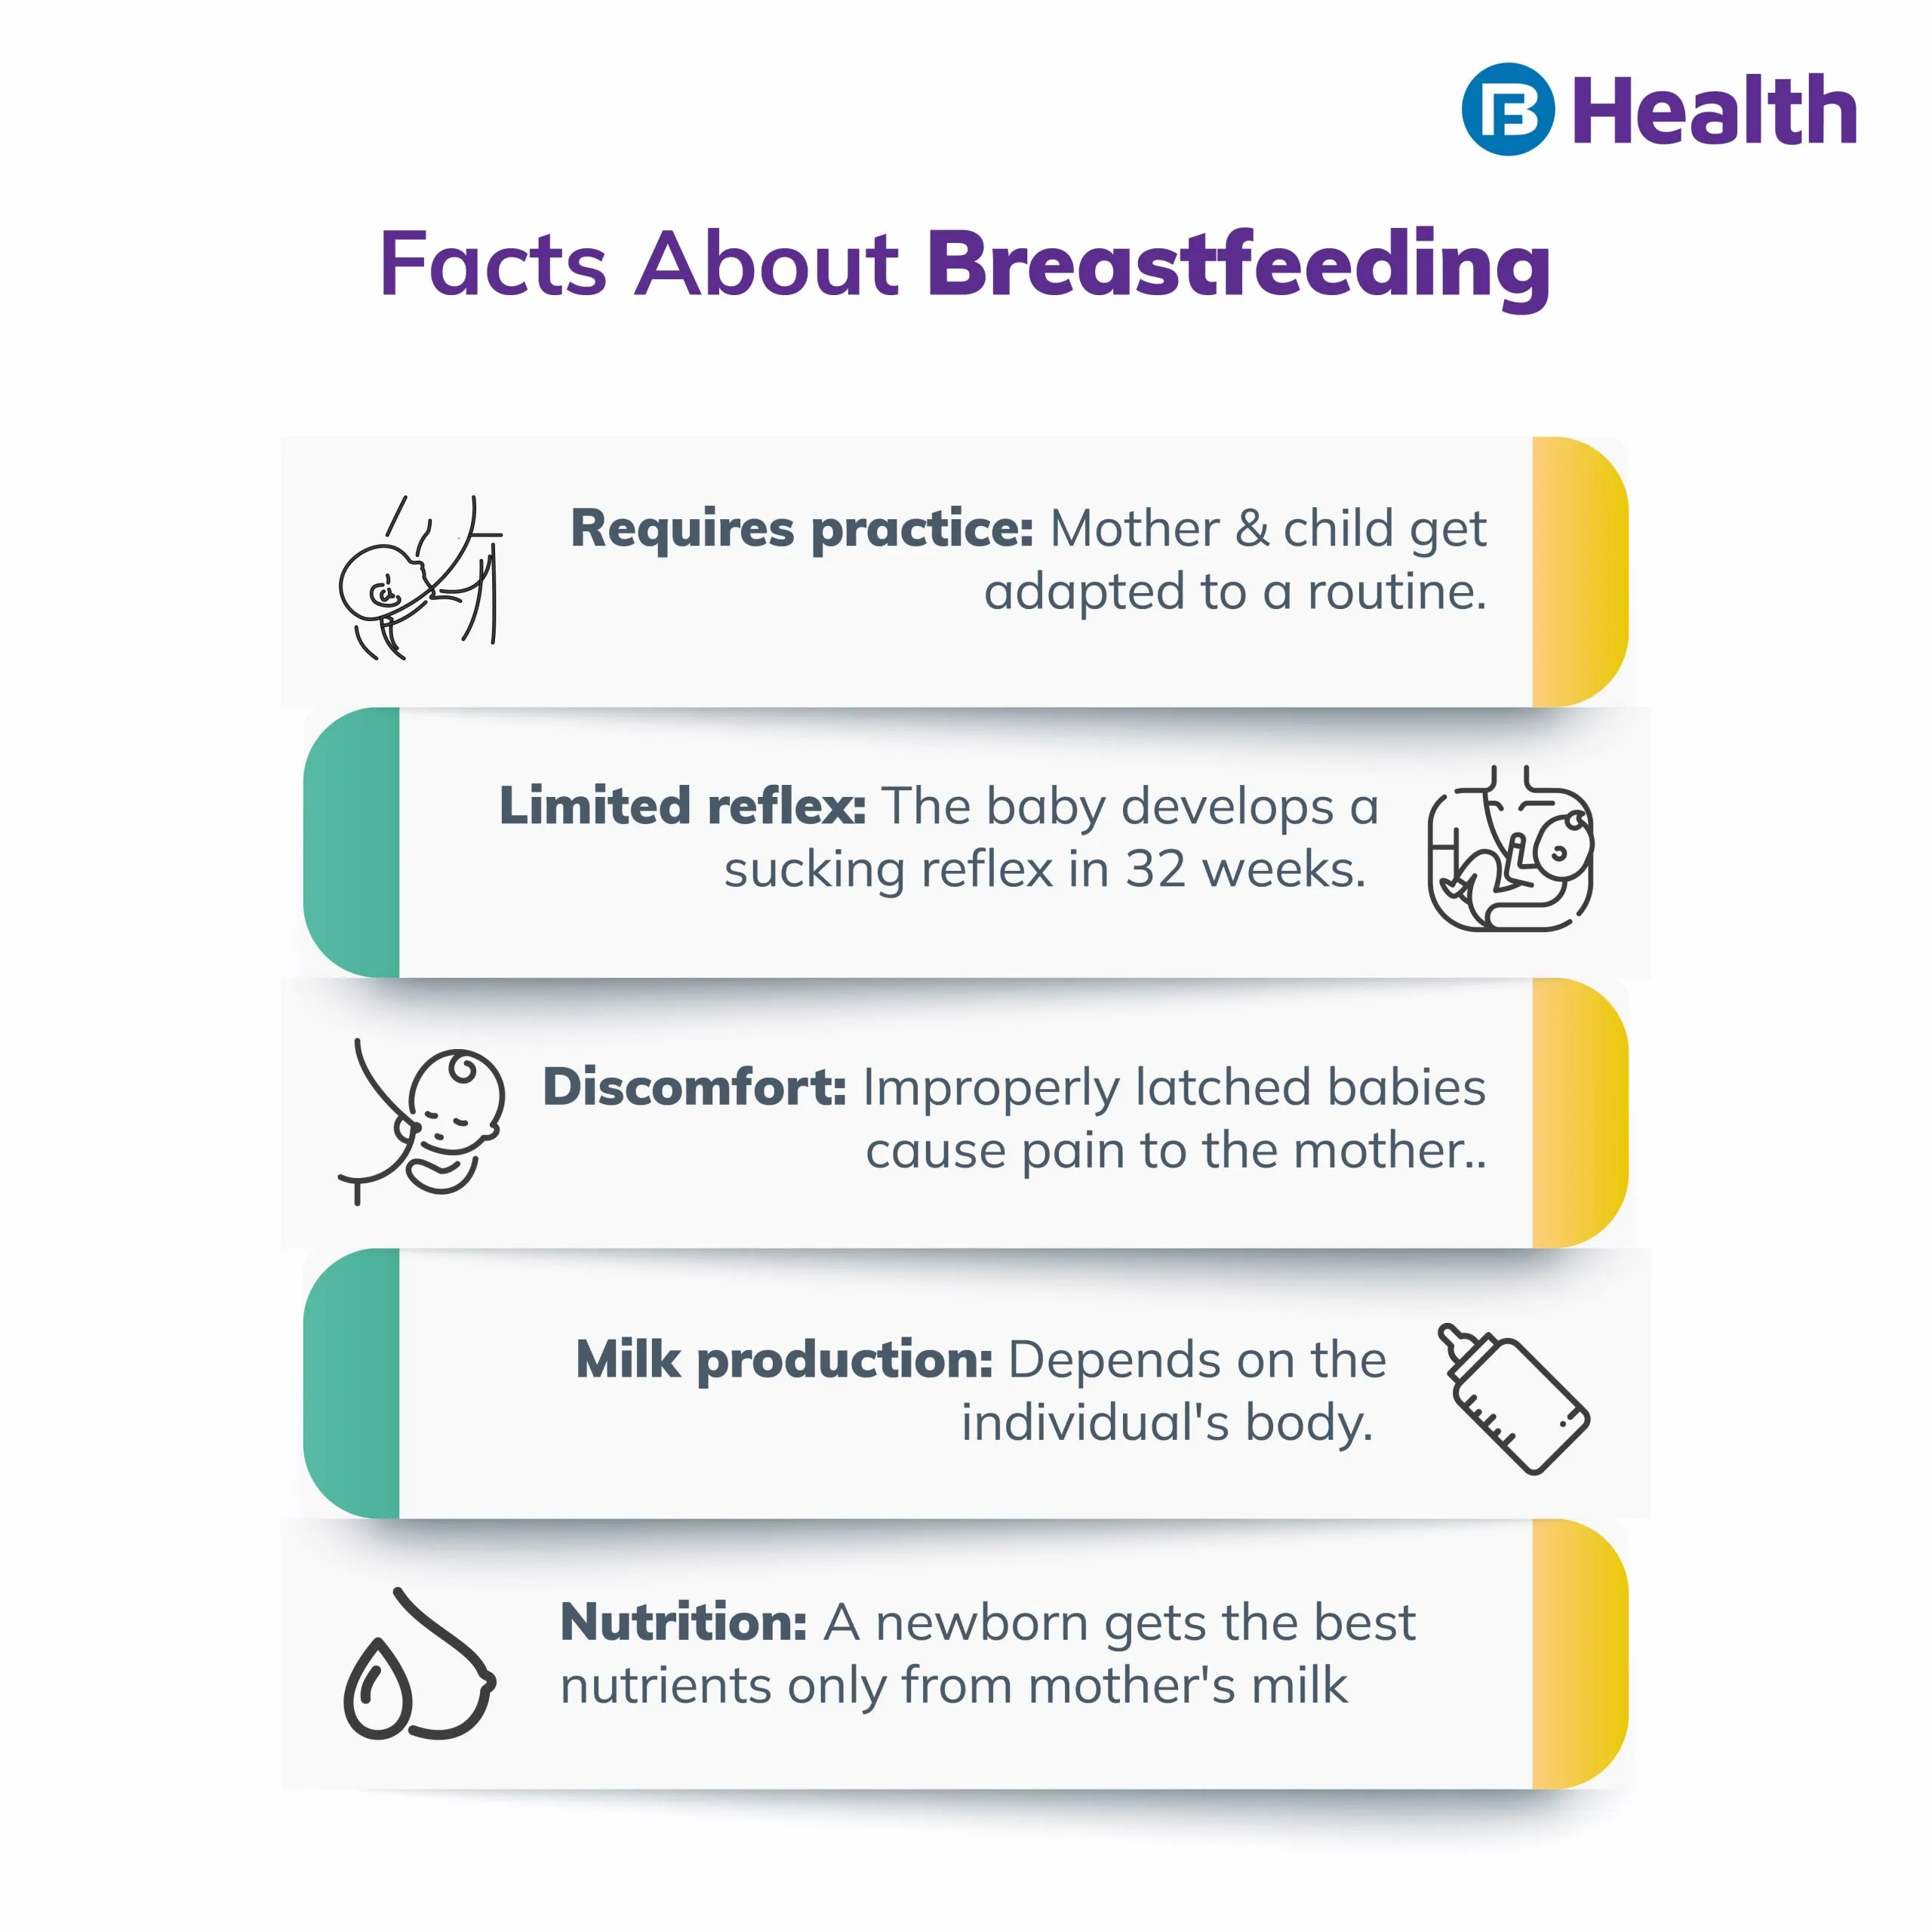 World Breastfeeding Week: Facts and Myths about Breastfeeding